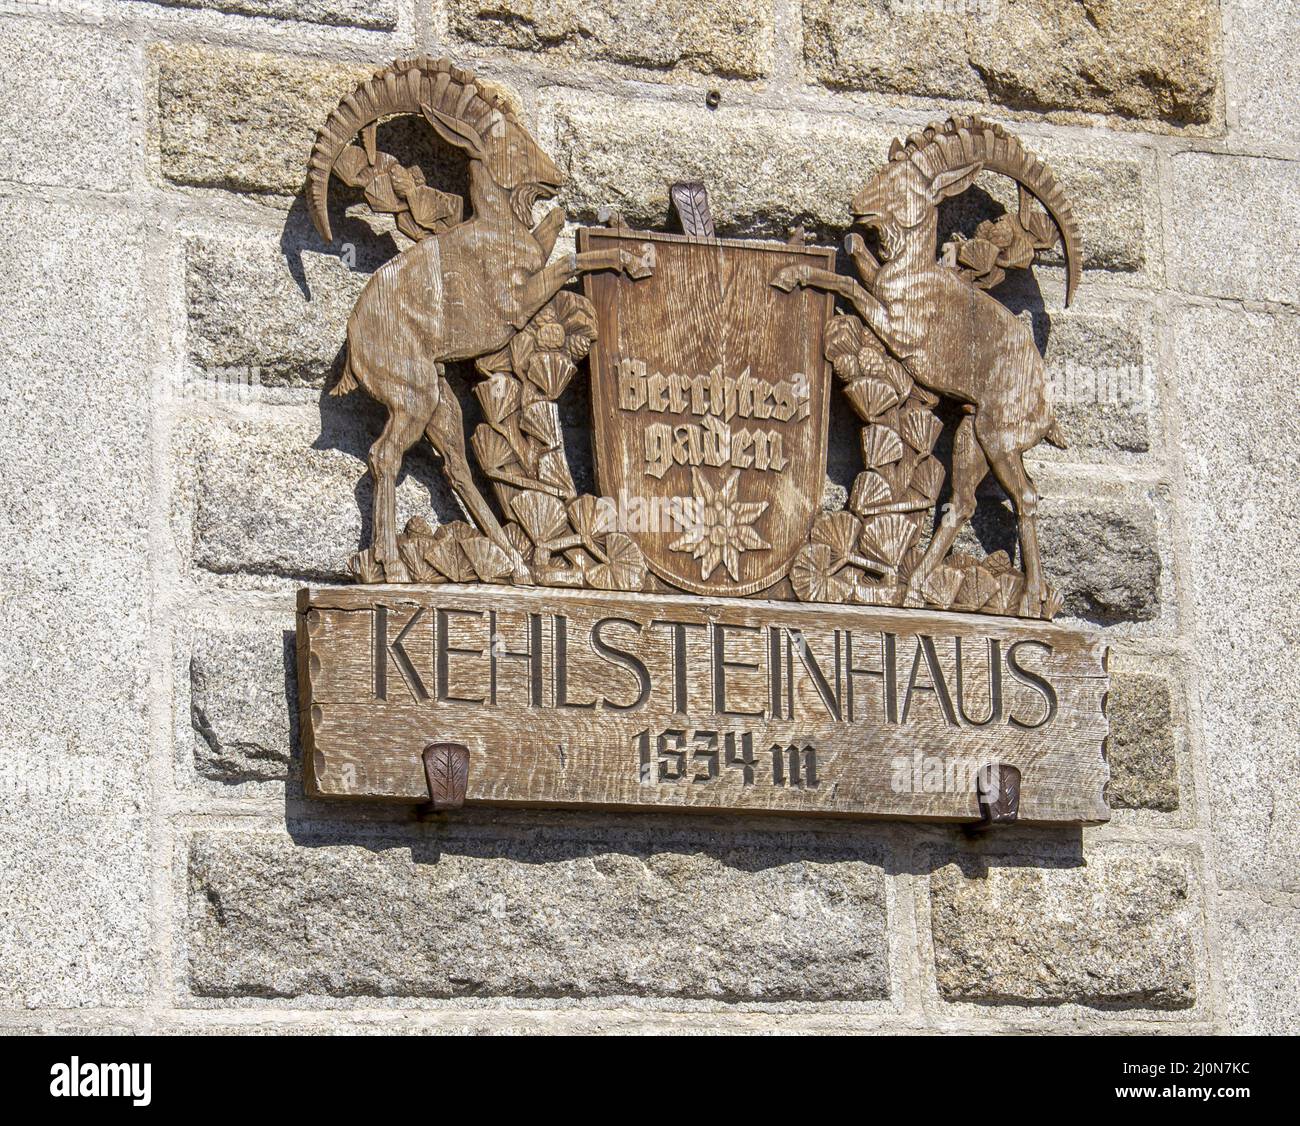 Wooden sign KEHLSTEINHAUS on the stone wall. Eagle's Nest, Kehlstein, Obersalzberg, Berchtesgaden, Germany. Stock Photo